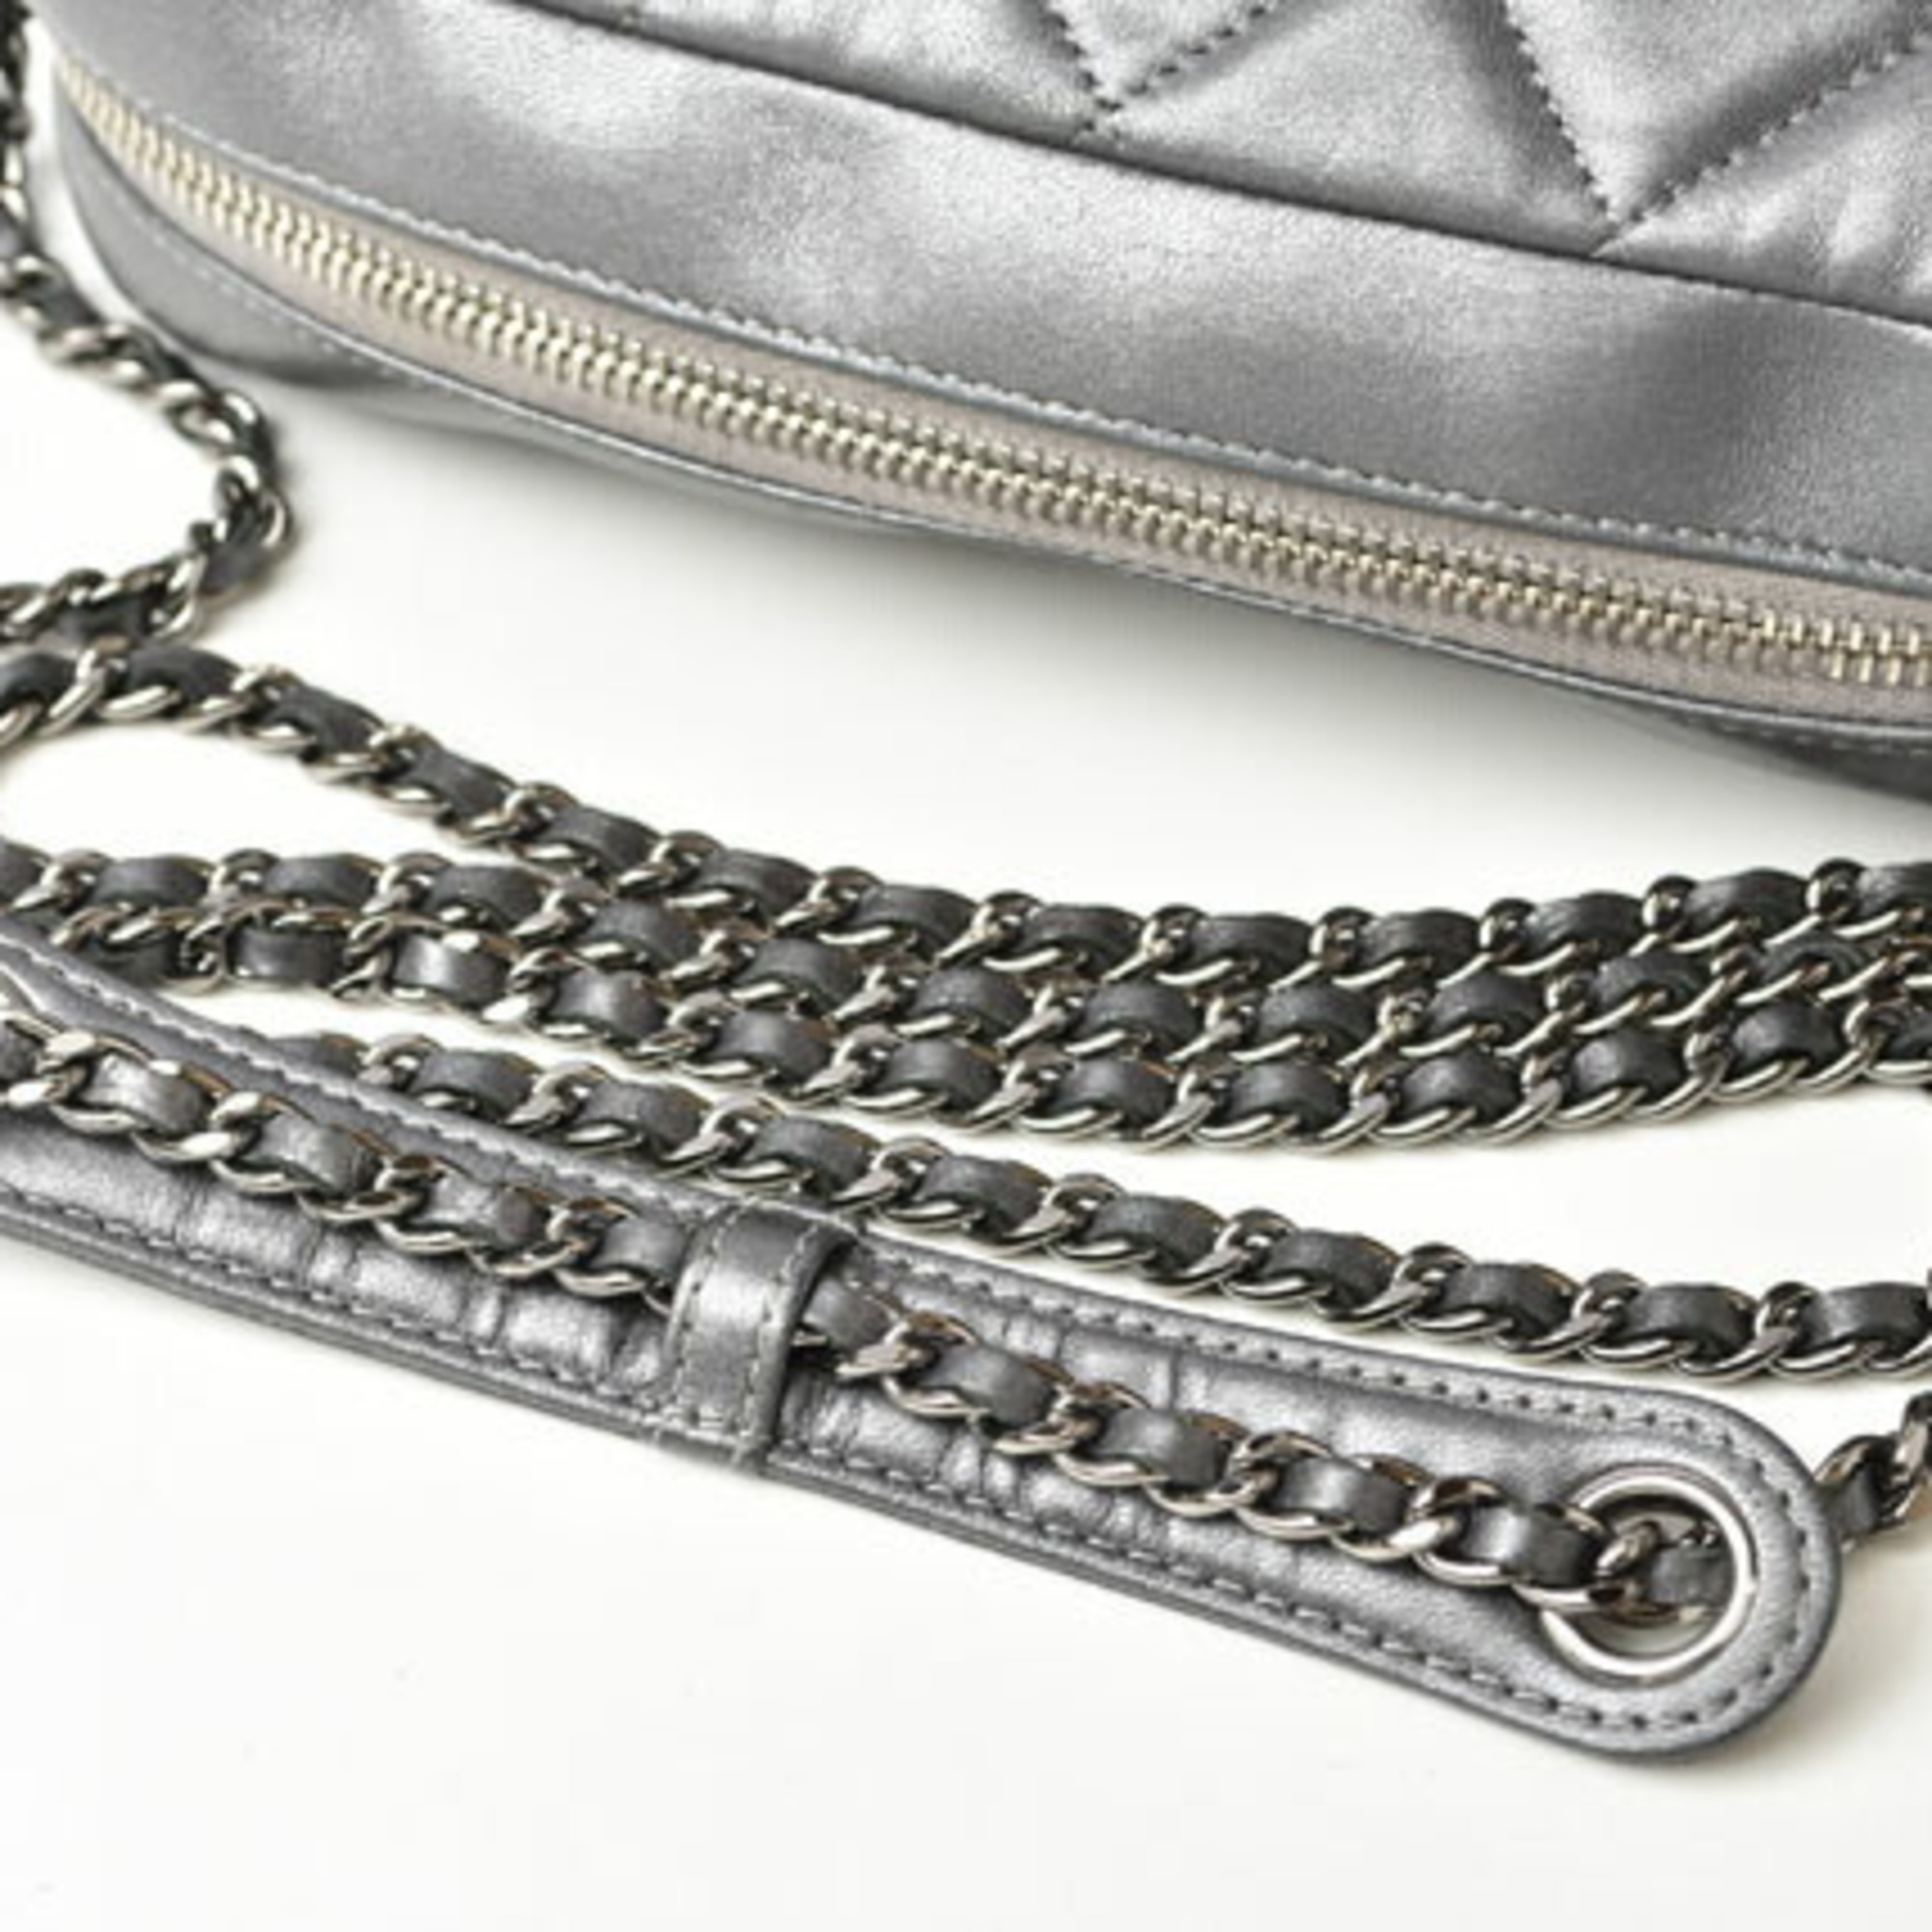 CHANEL Chain Shoulder Bag Lambskin Matelasse Quilted Stitch Silver